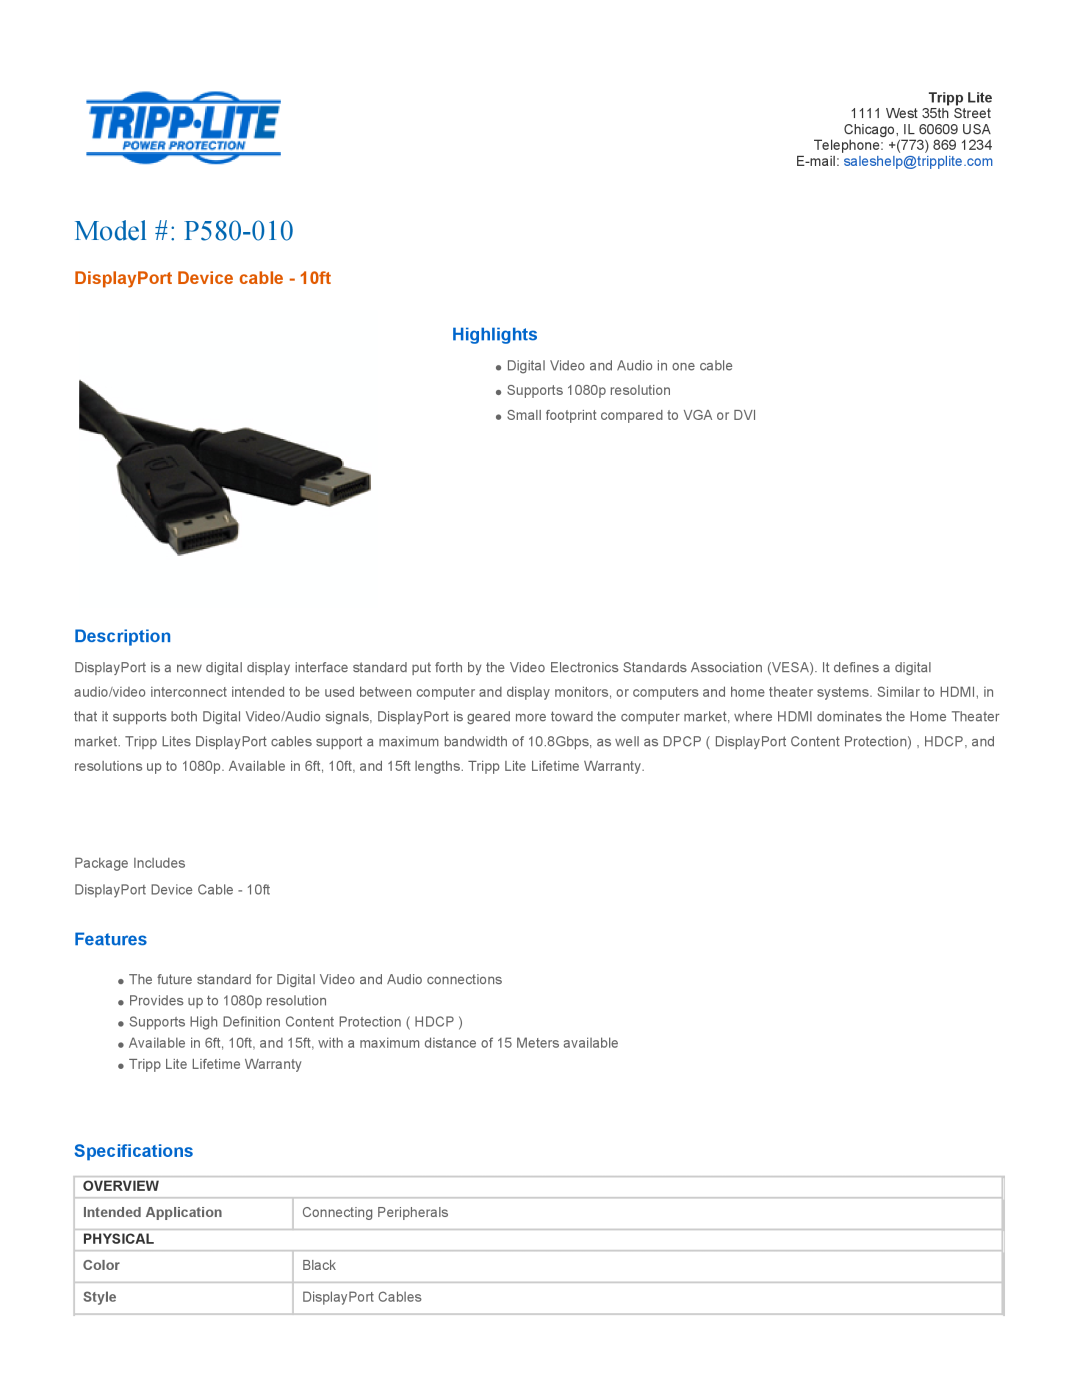 Tripp Lite P580-010 specifications Overview, Intended Application, Connecting Peripherals, Physical, Color, Black, Style 